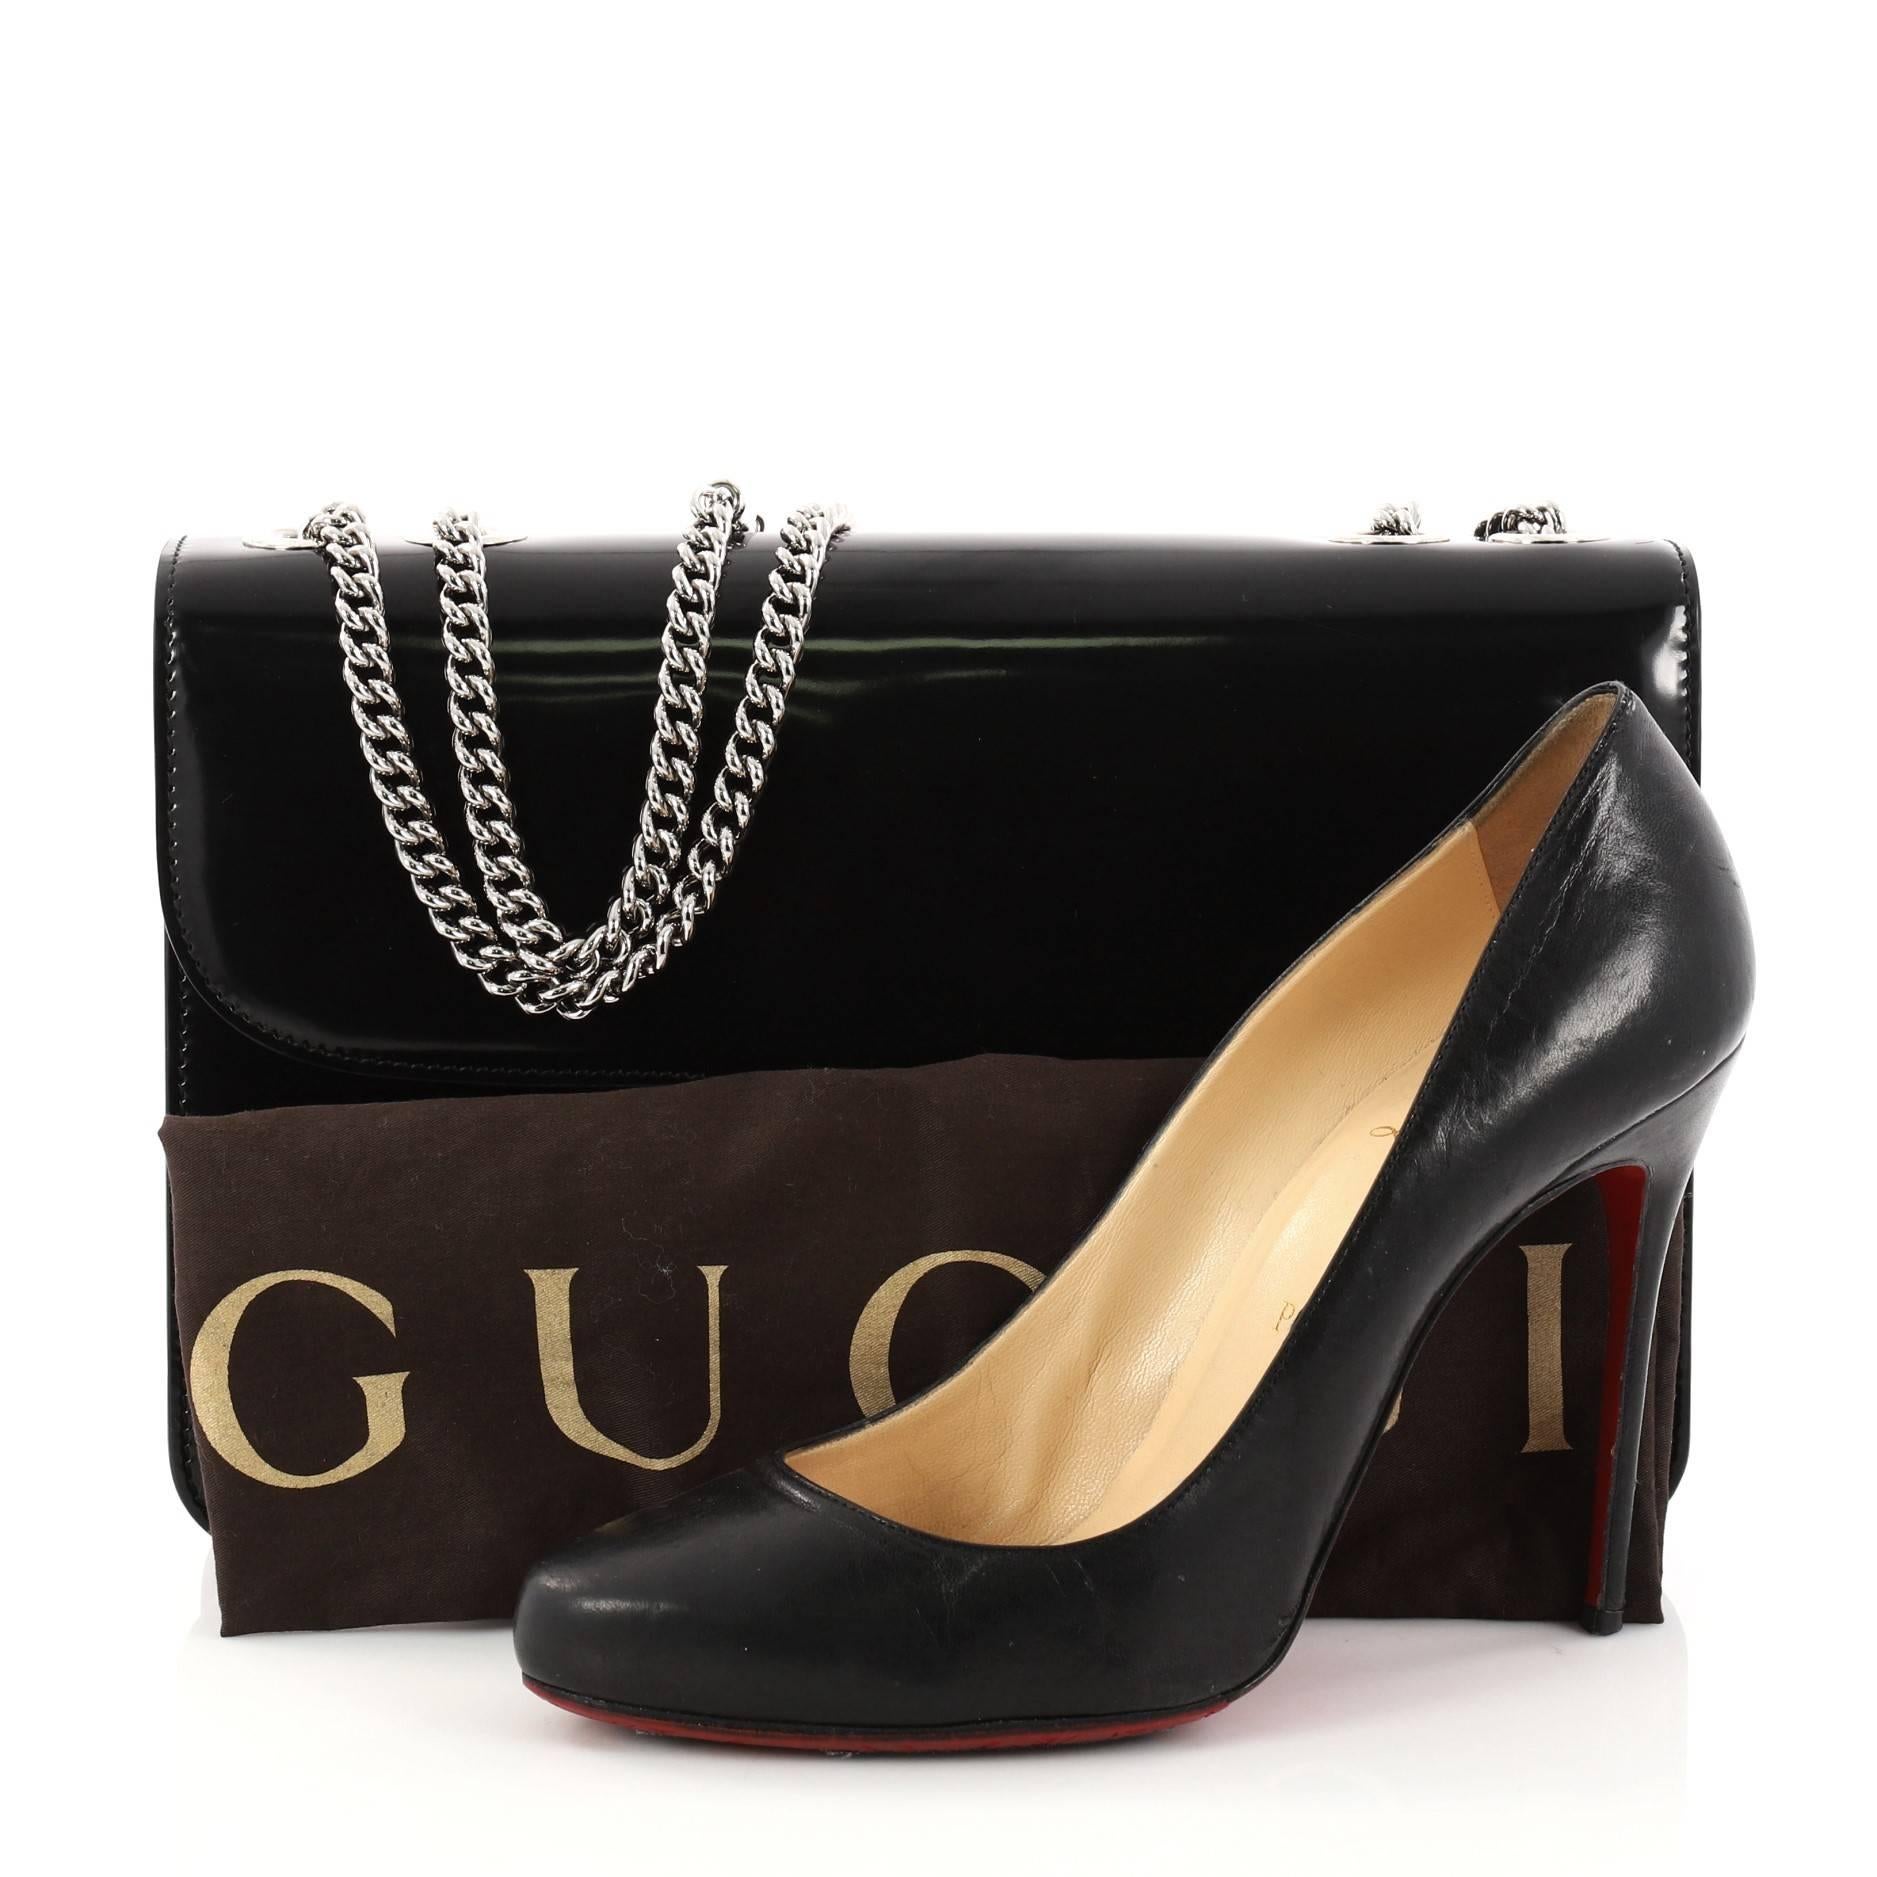 This authentic Gucci Interlocking Shoulder Bag Patent Medium is your perfect companion for day to night. Crafted from black patent leather, this elegant shoulder bag features a chain link shoulder strap, signature Gucci interlocking closure,